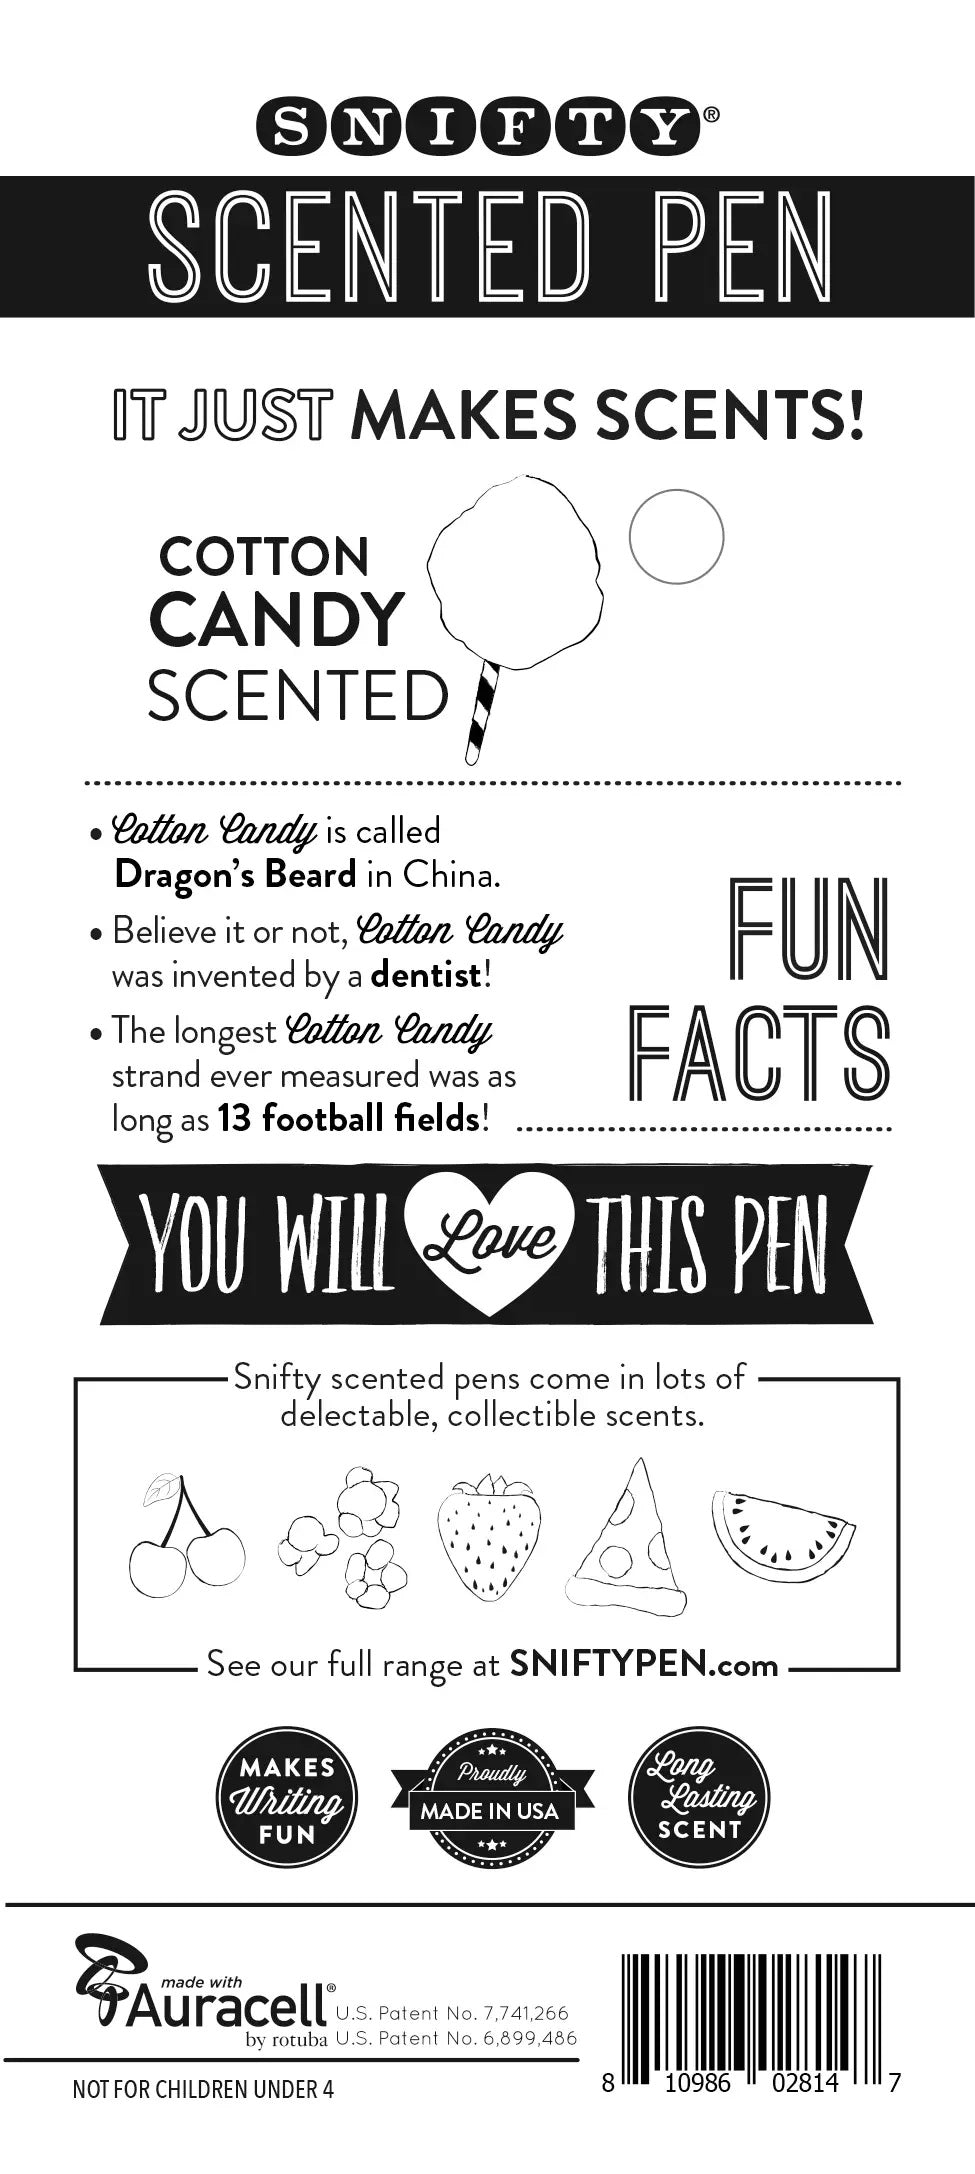 Cotton Candy Scented Pen